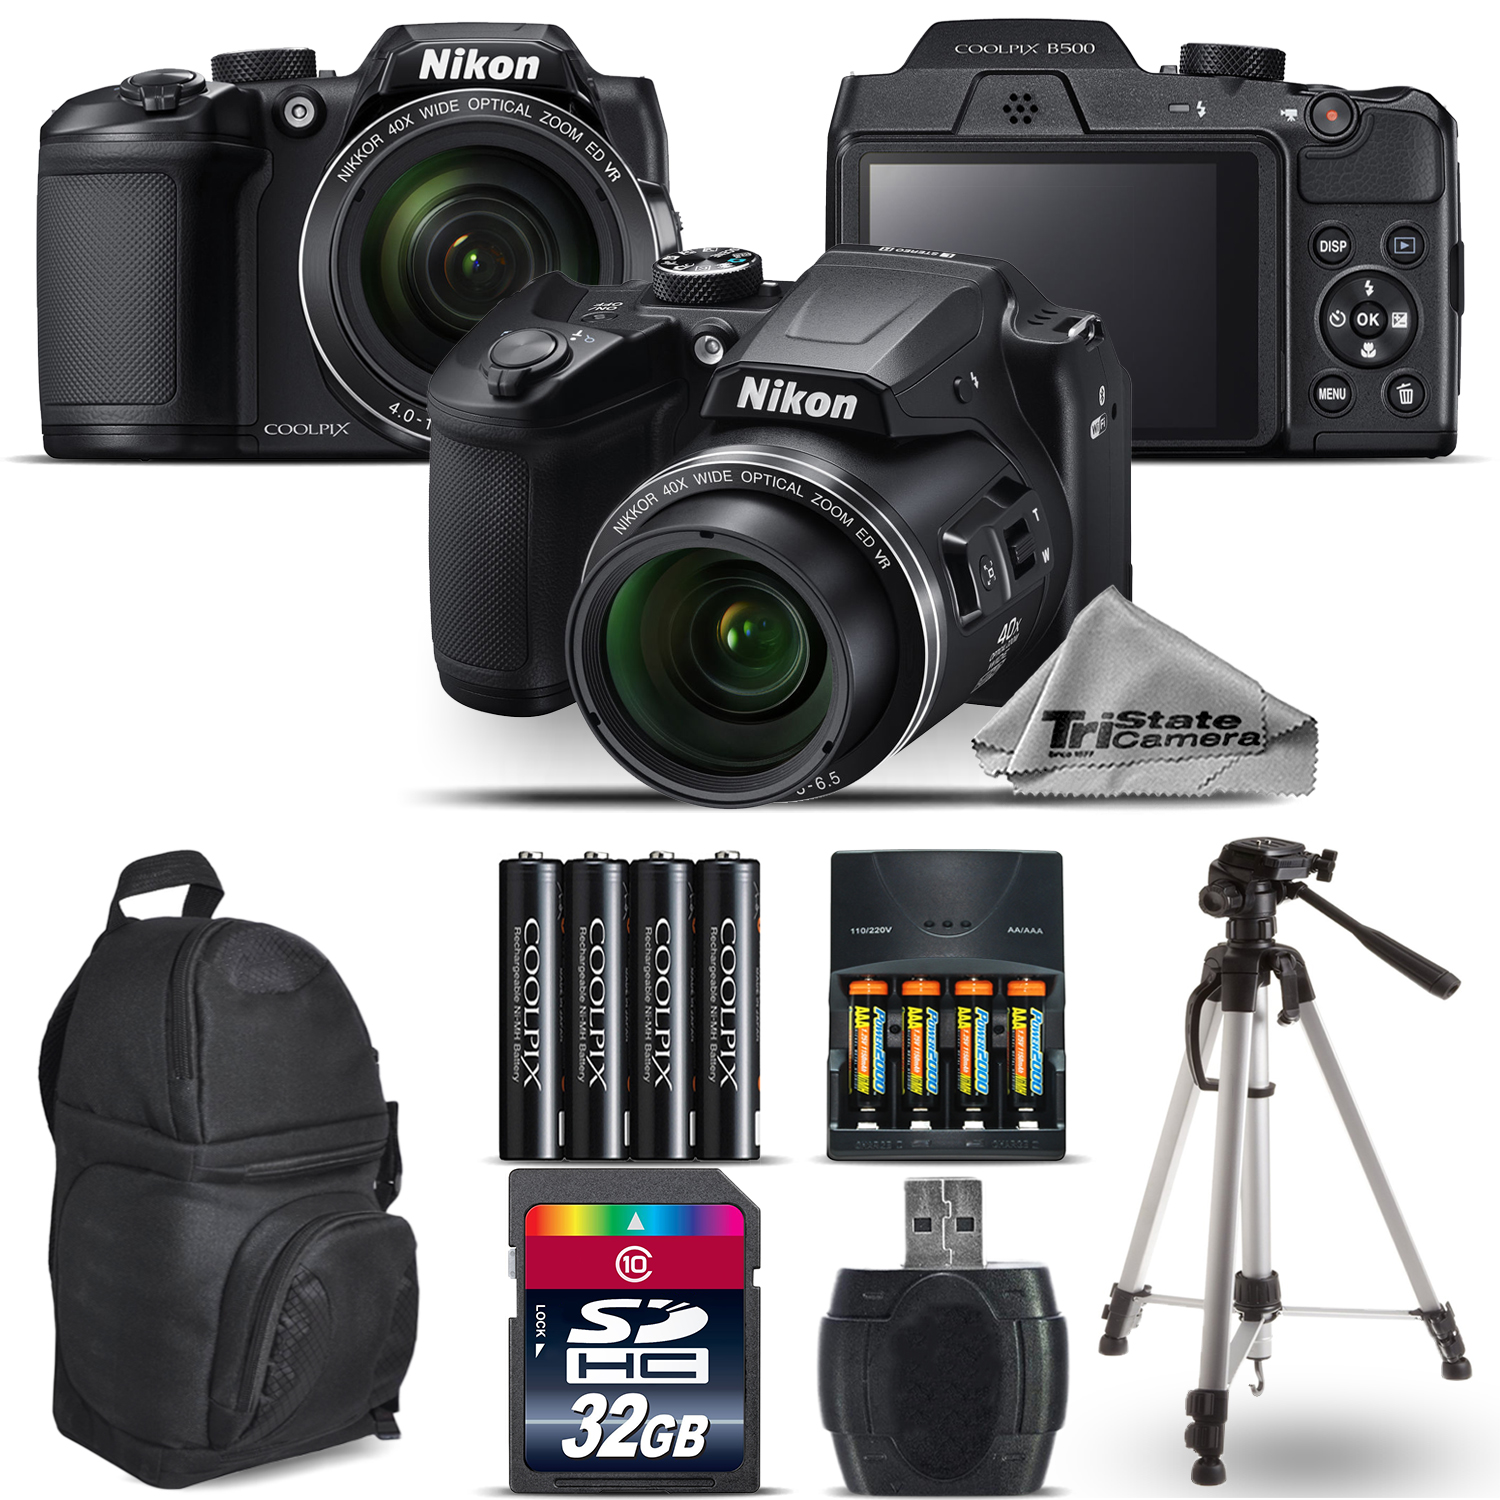 COOLPIX B500 Camera 40x Optical Zoom + Extra Battery + Backpack -32GB Kit *FREE SHIPPING*